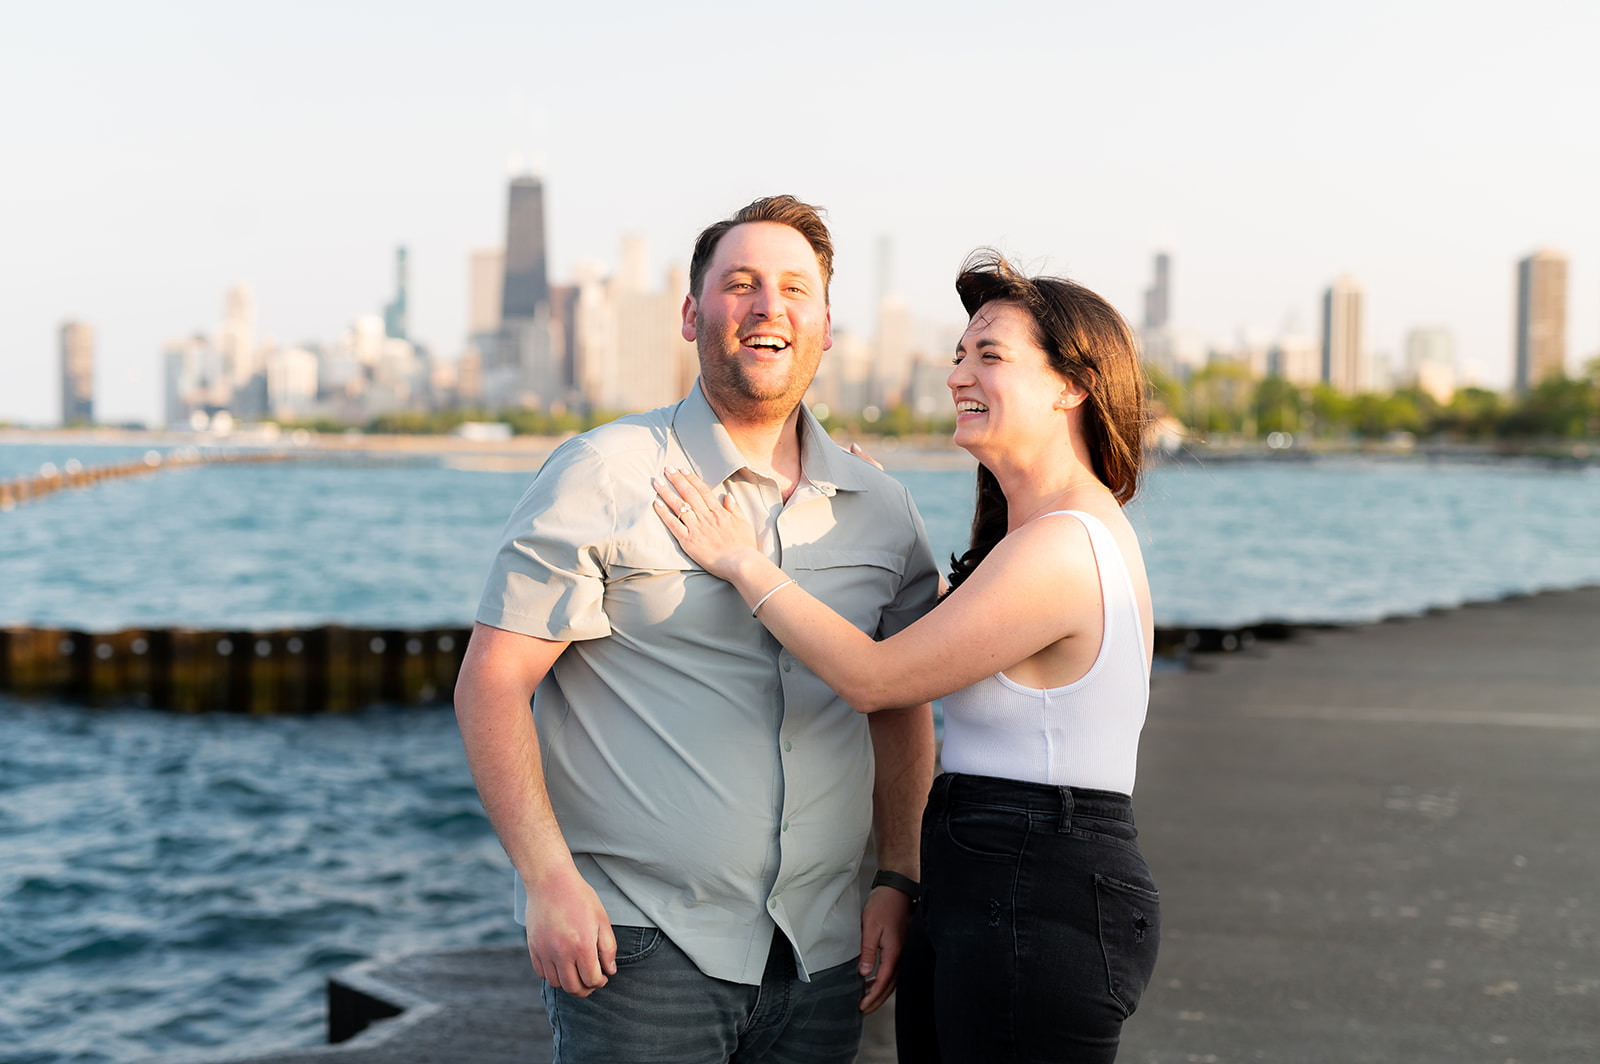 Theater On the Lake Engagement Session